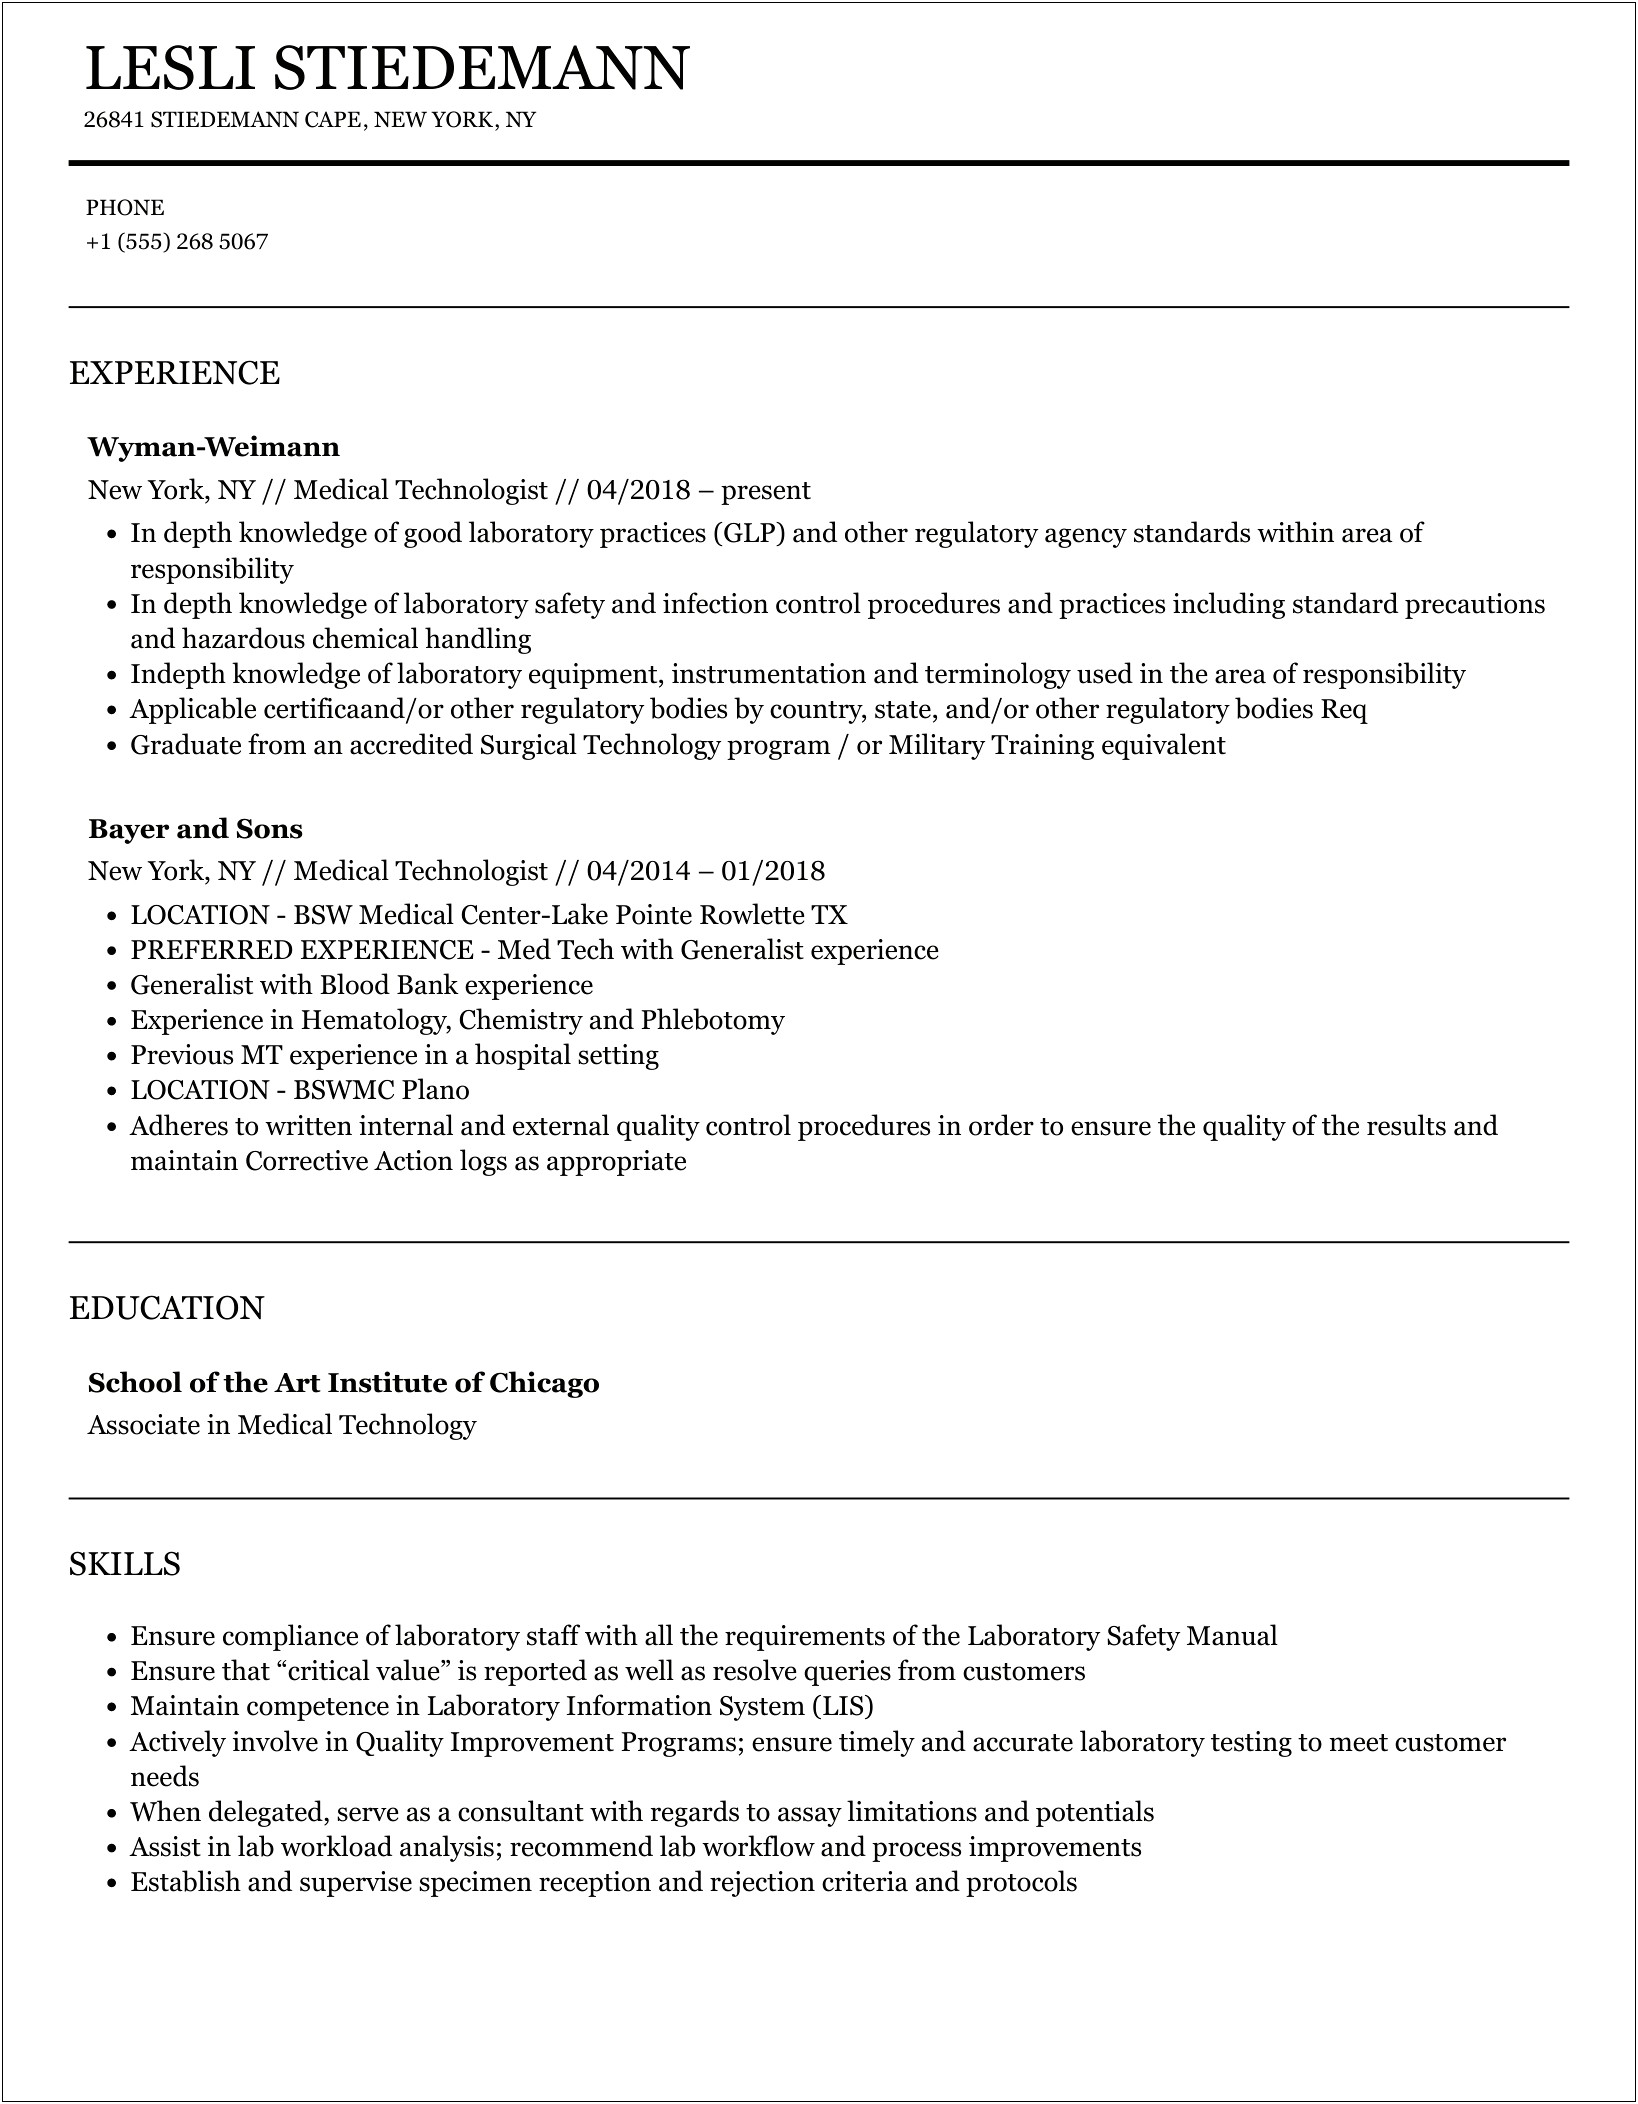 Resume For Fresh Graduate Medical Technologist Without Experience